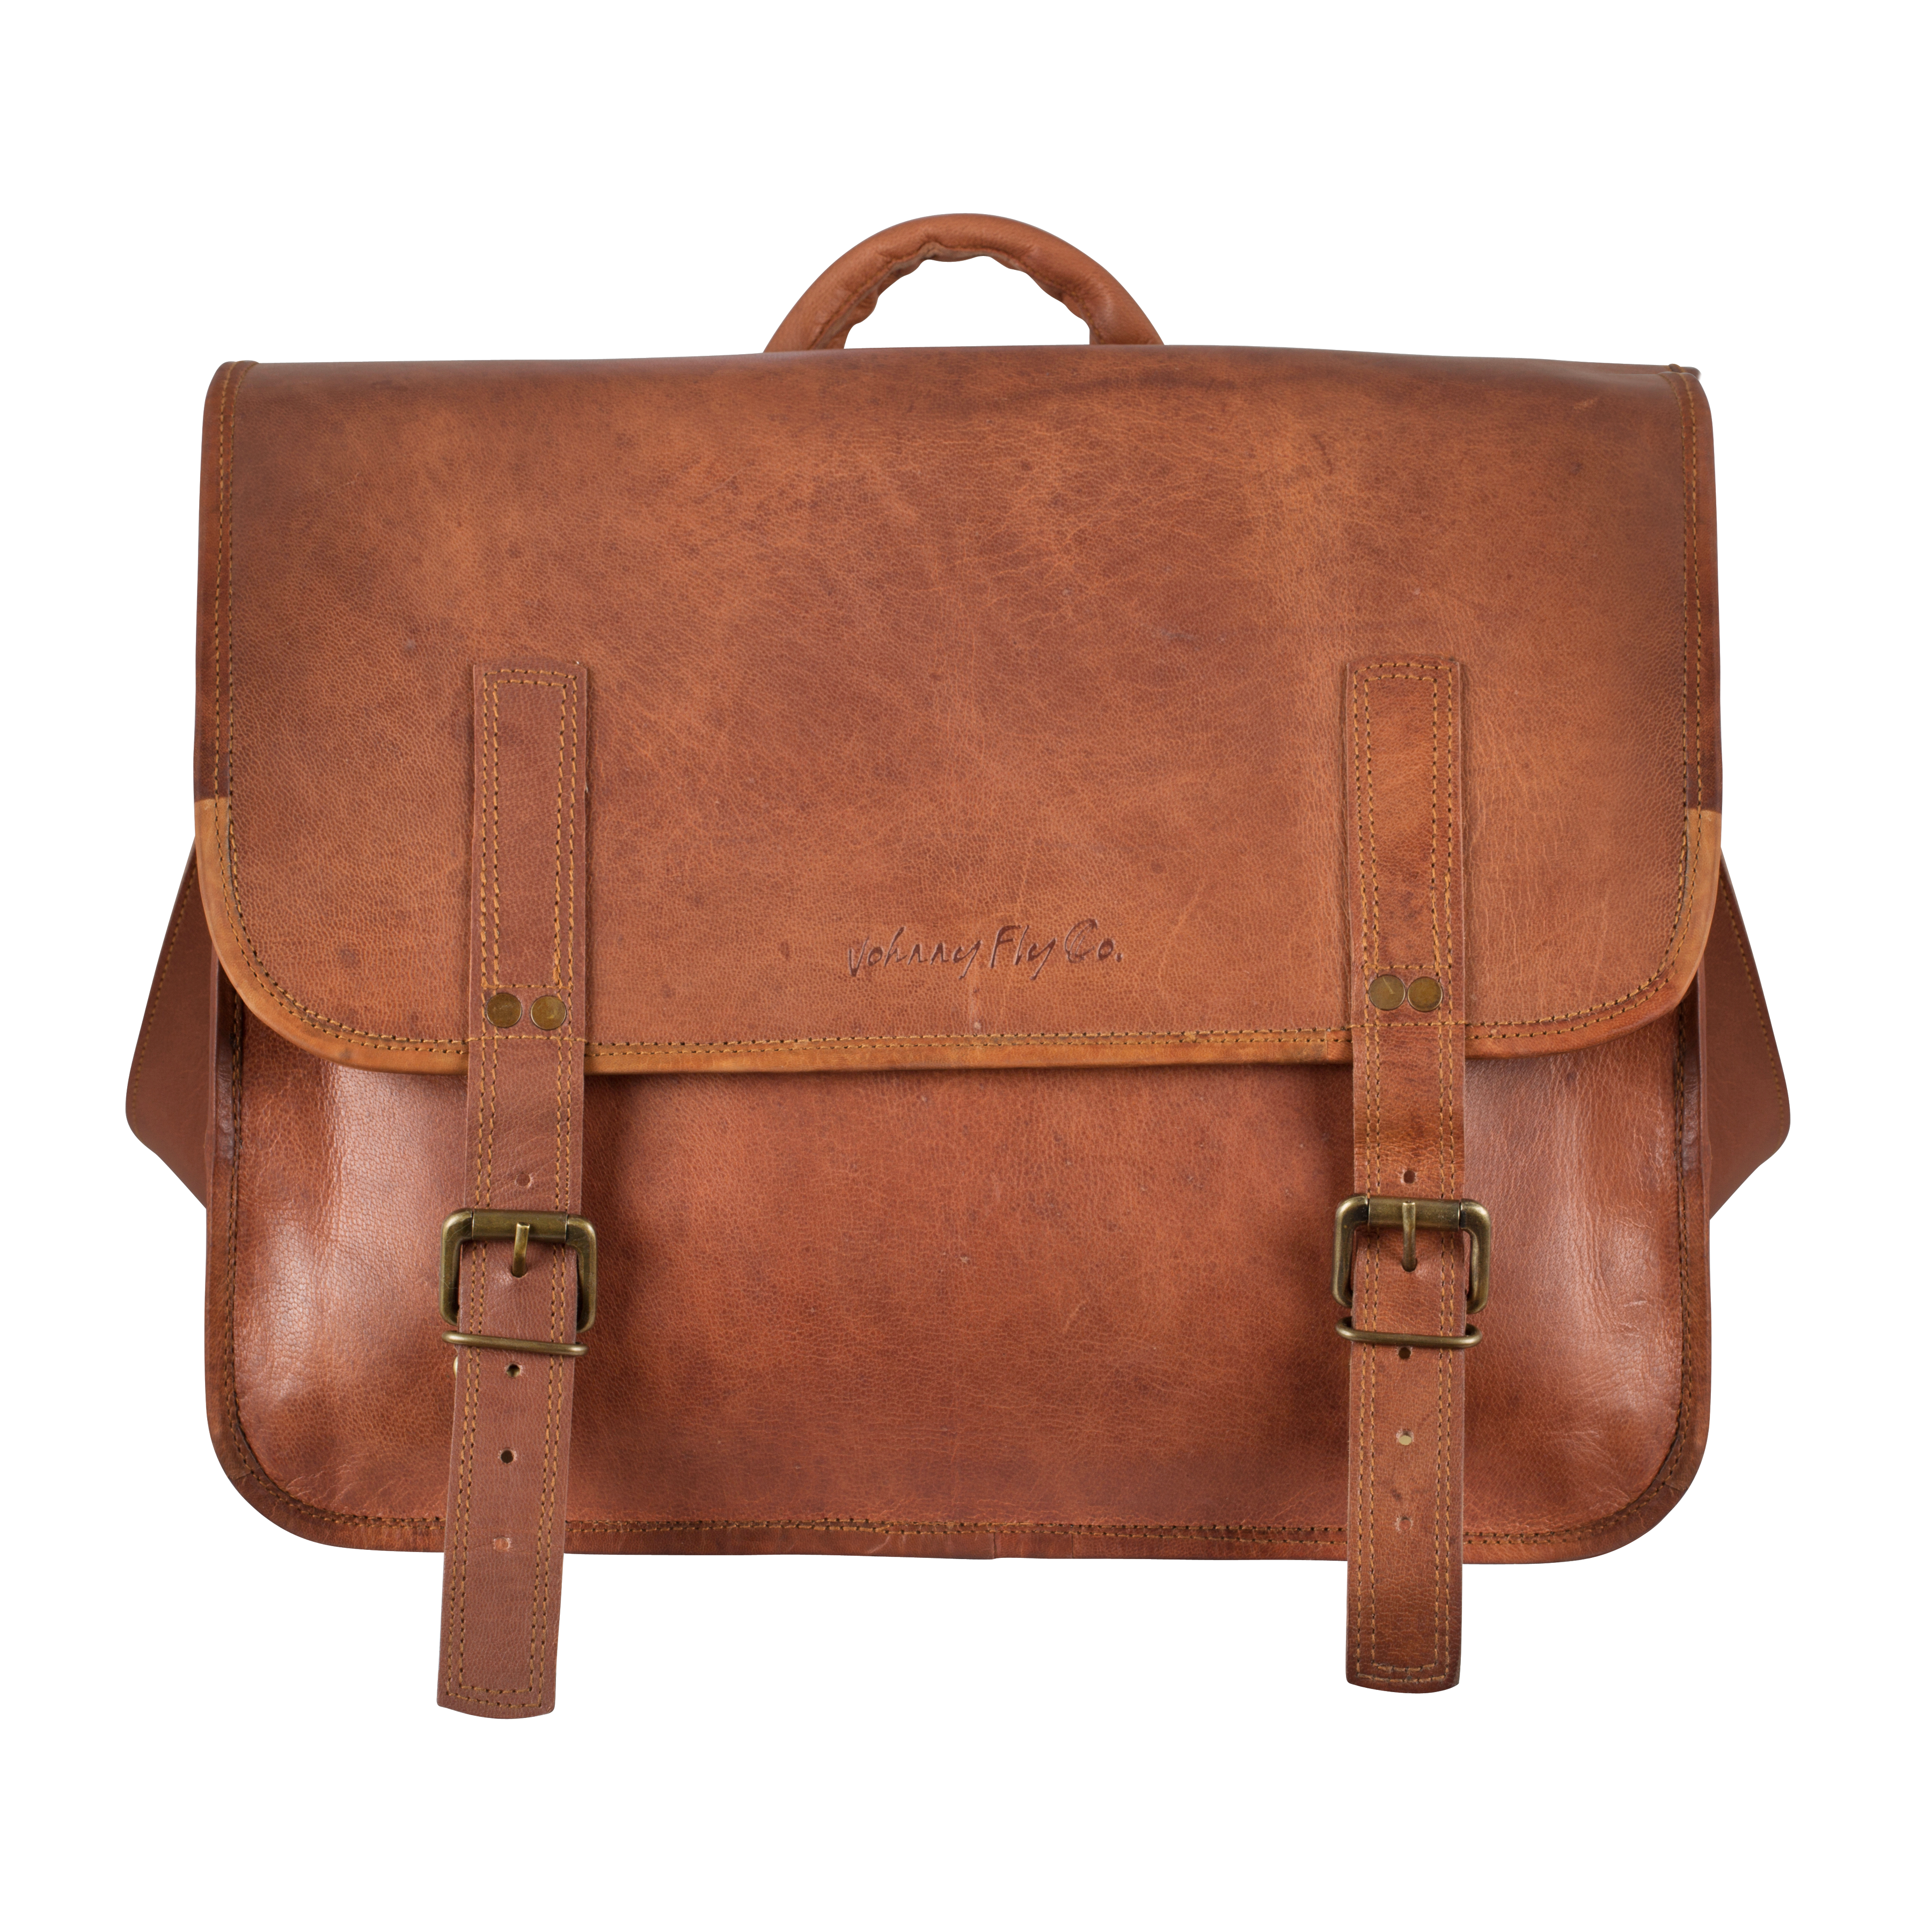 Studio Camera bag - Johnny Fly - Leather Bags